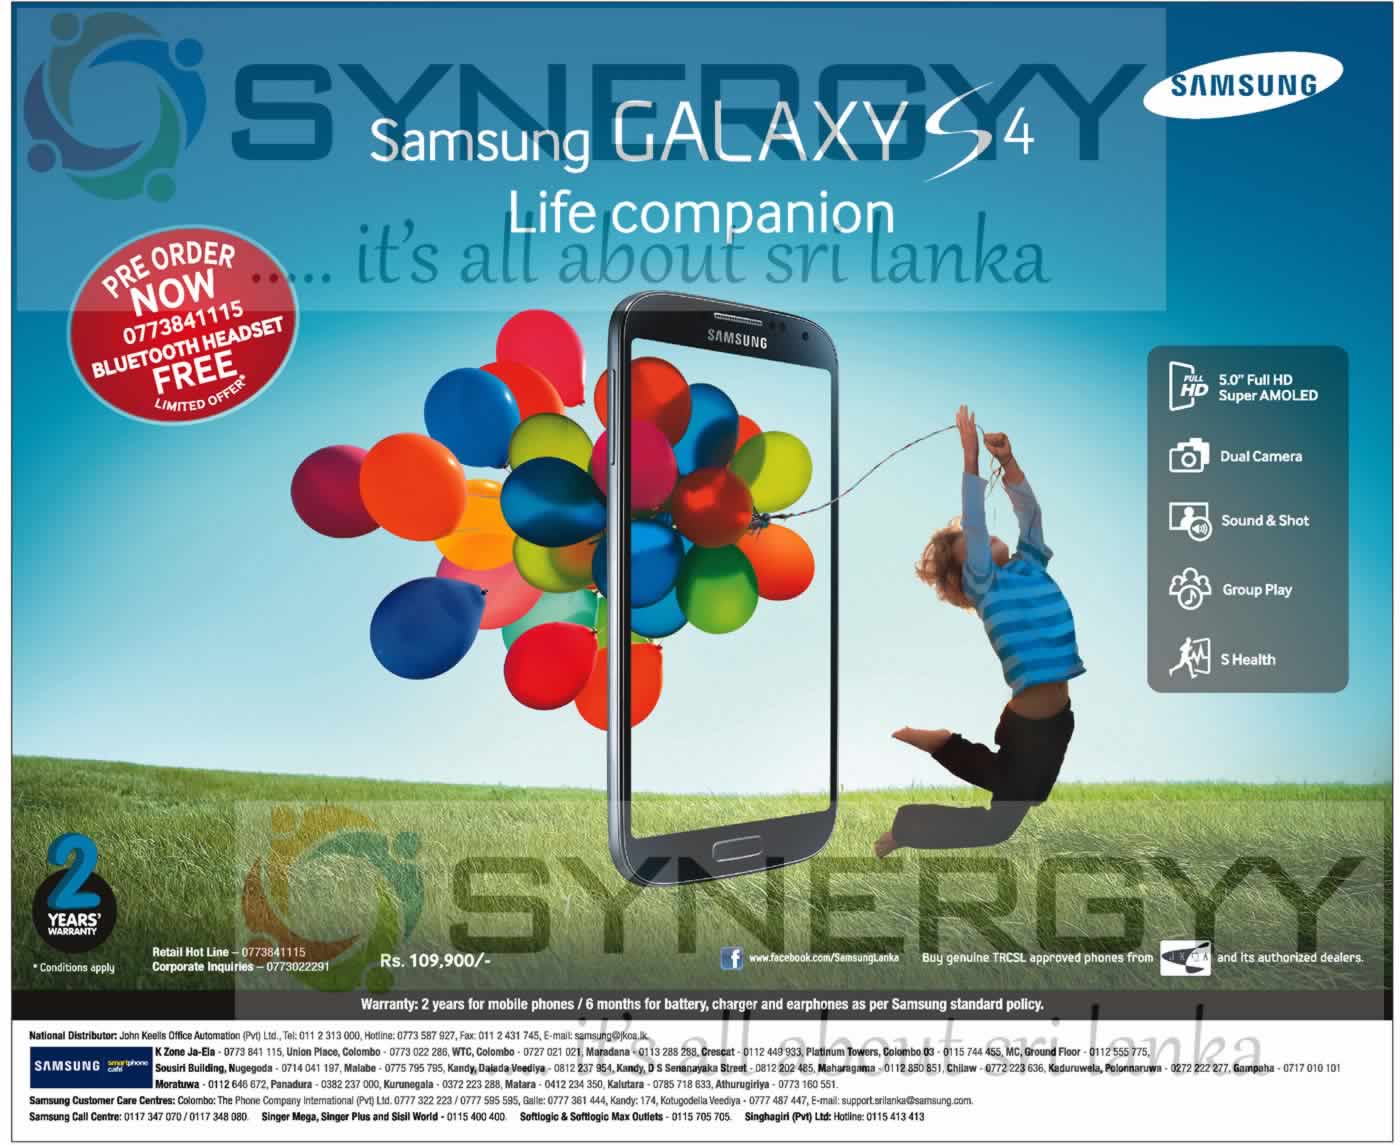 Samsung Galaxy S4 – Pre orders Open Now – SynergyY